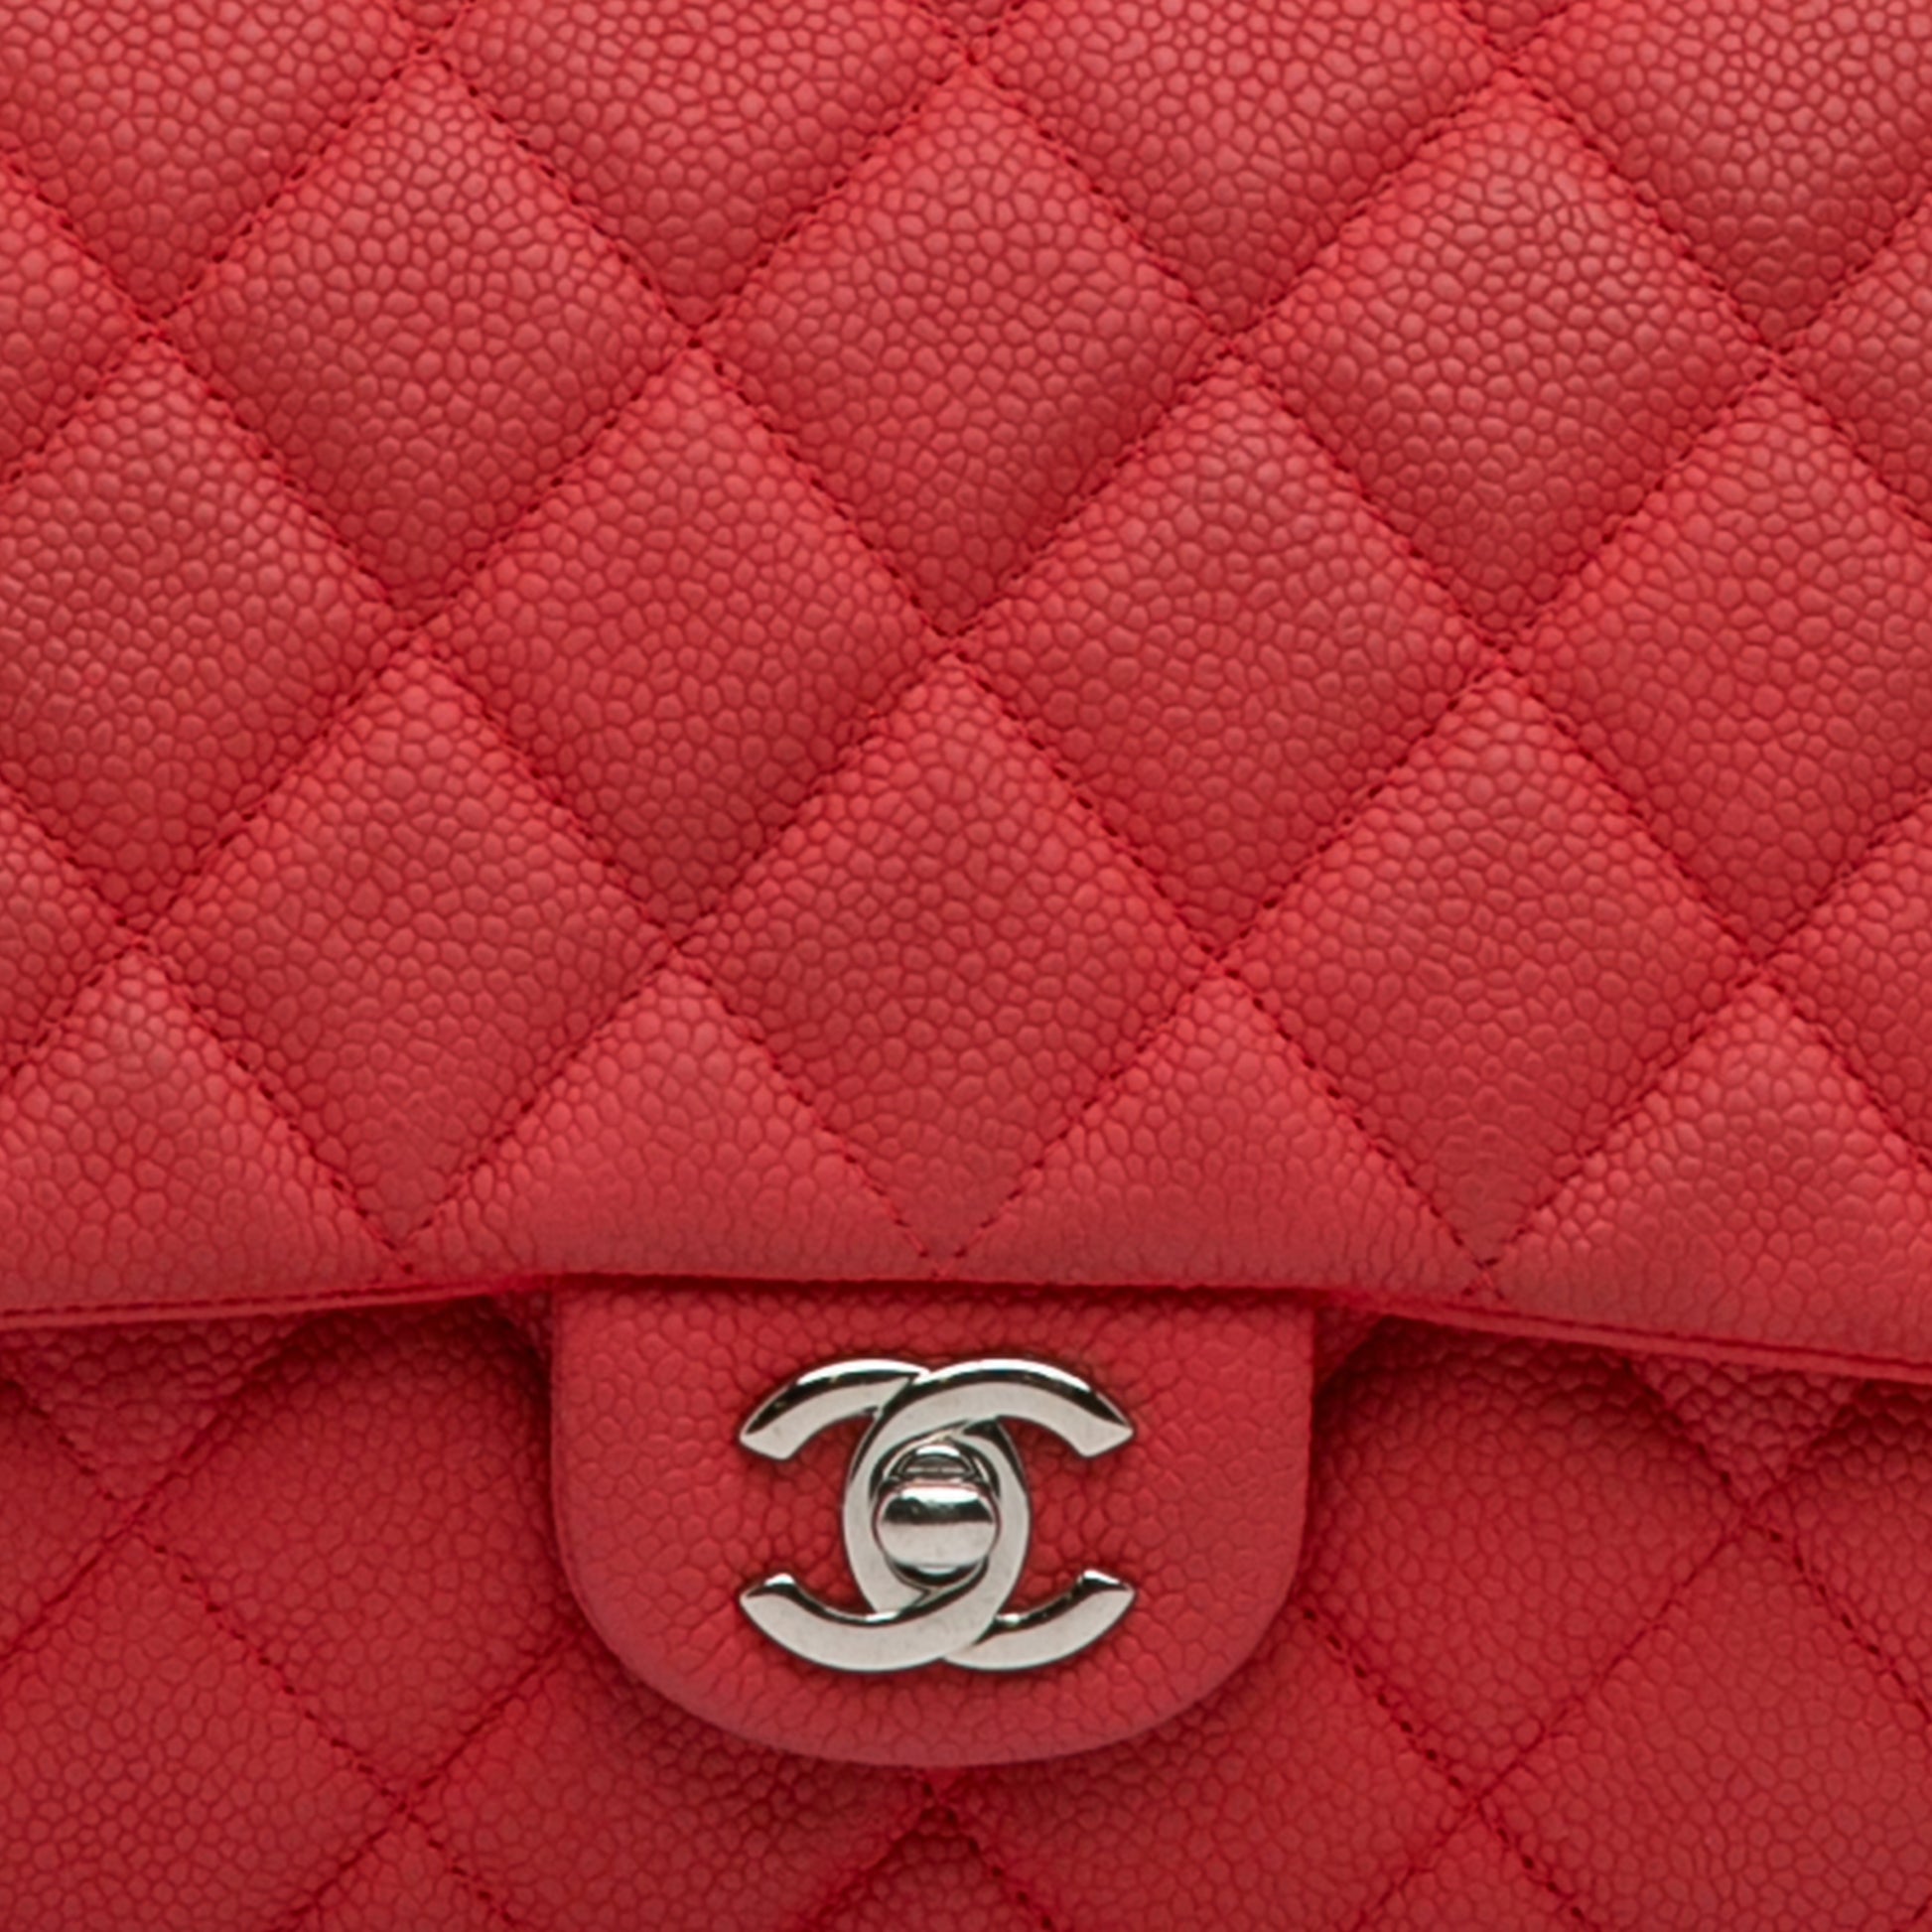 Quilted Caviar New Clutch on Chain Red - Gaby Paris